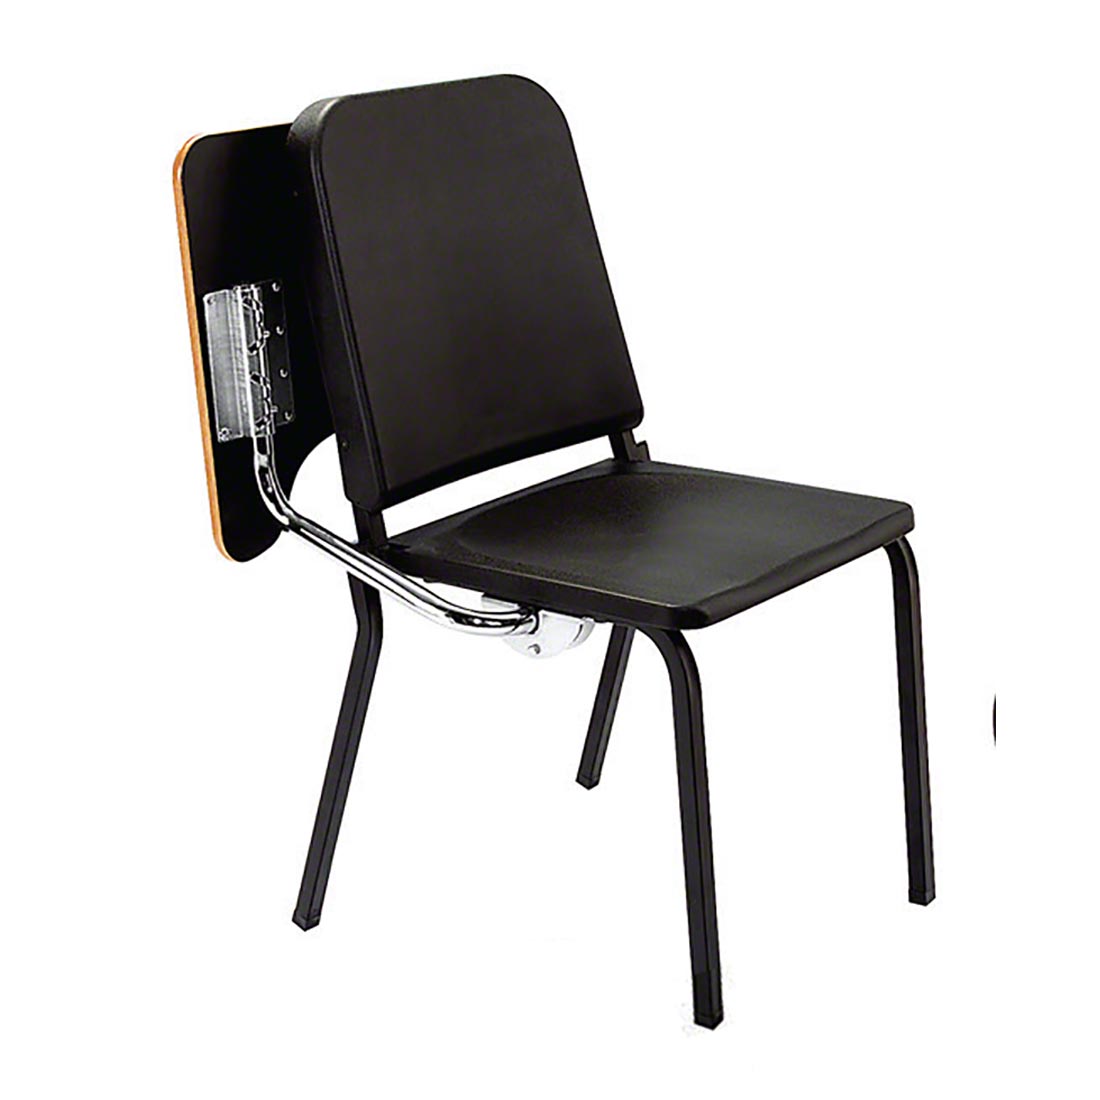 NPS 8200 Series Melody Music Chair 